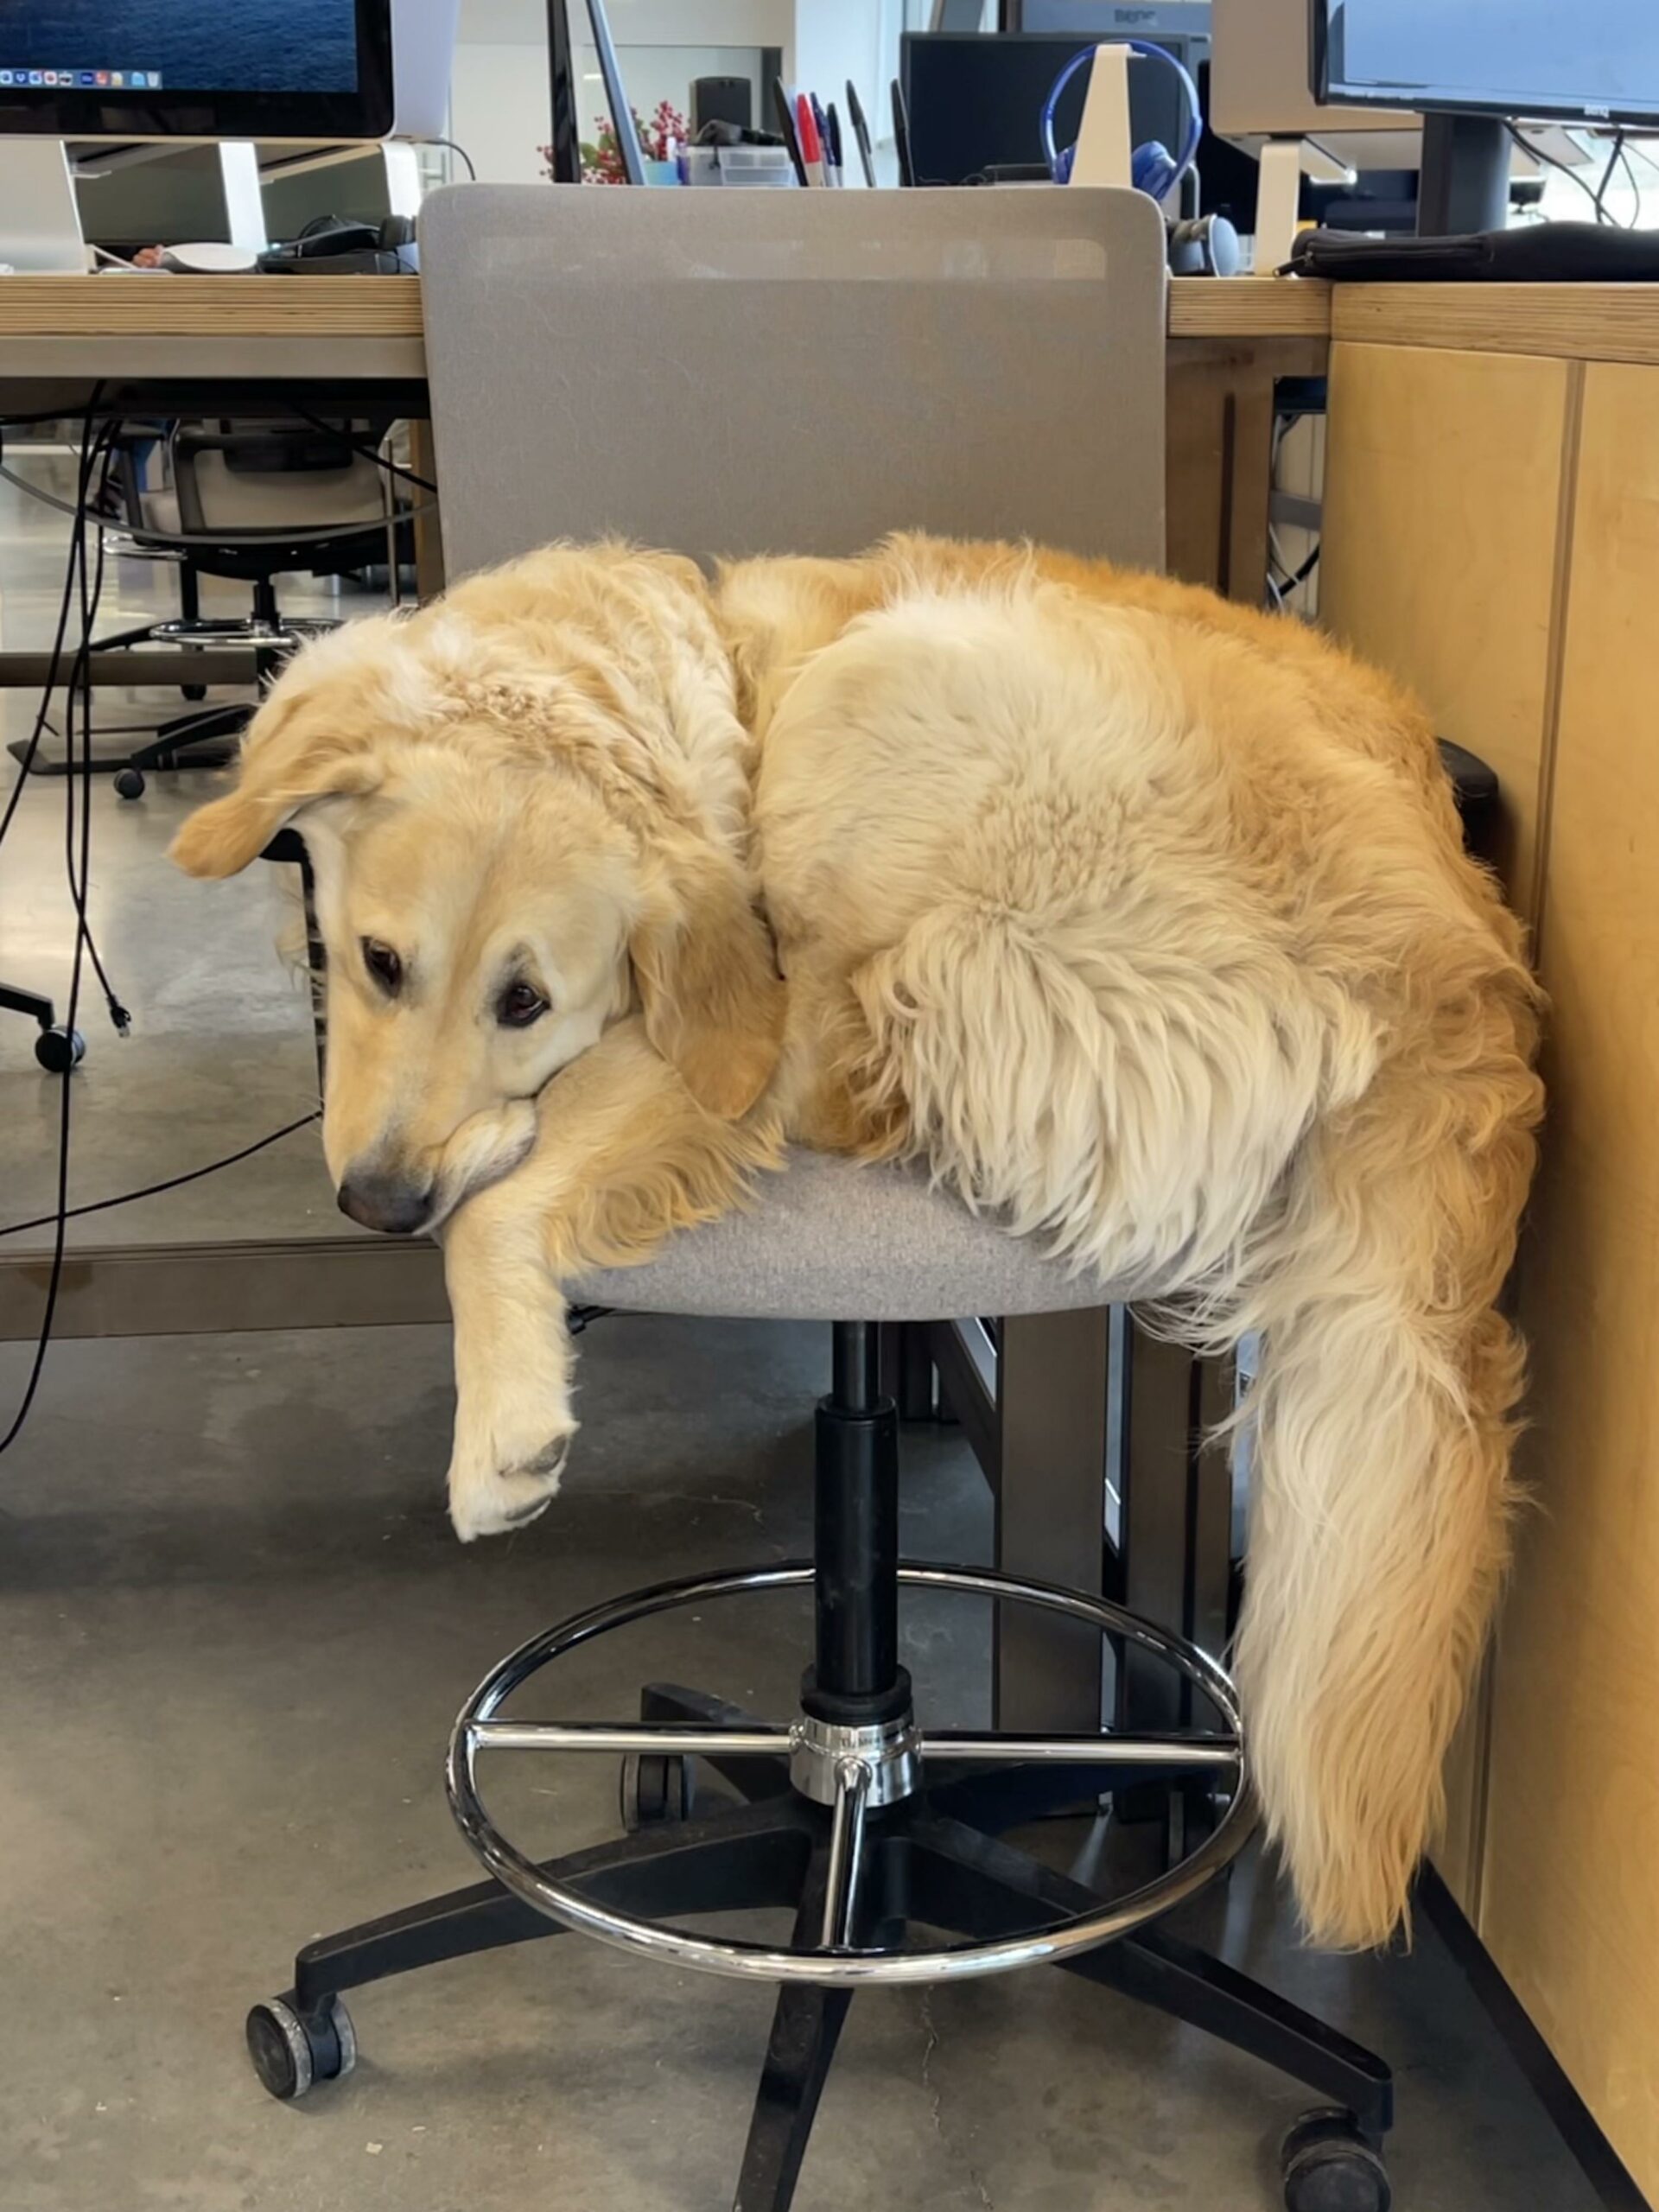 a large golden retriever squeezed into an office chair that is not his size